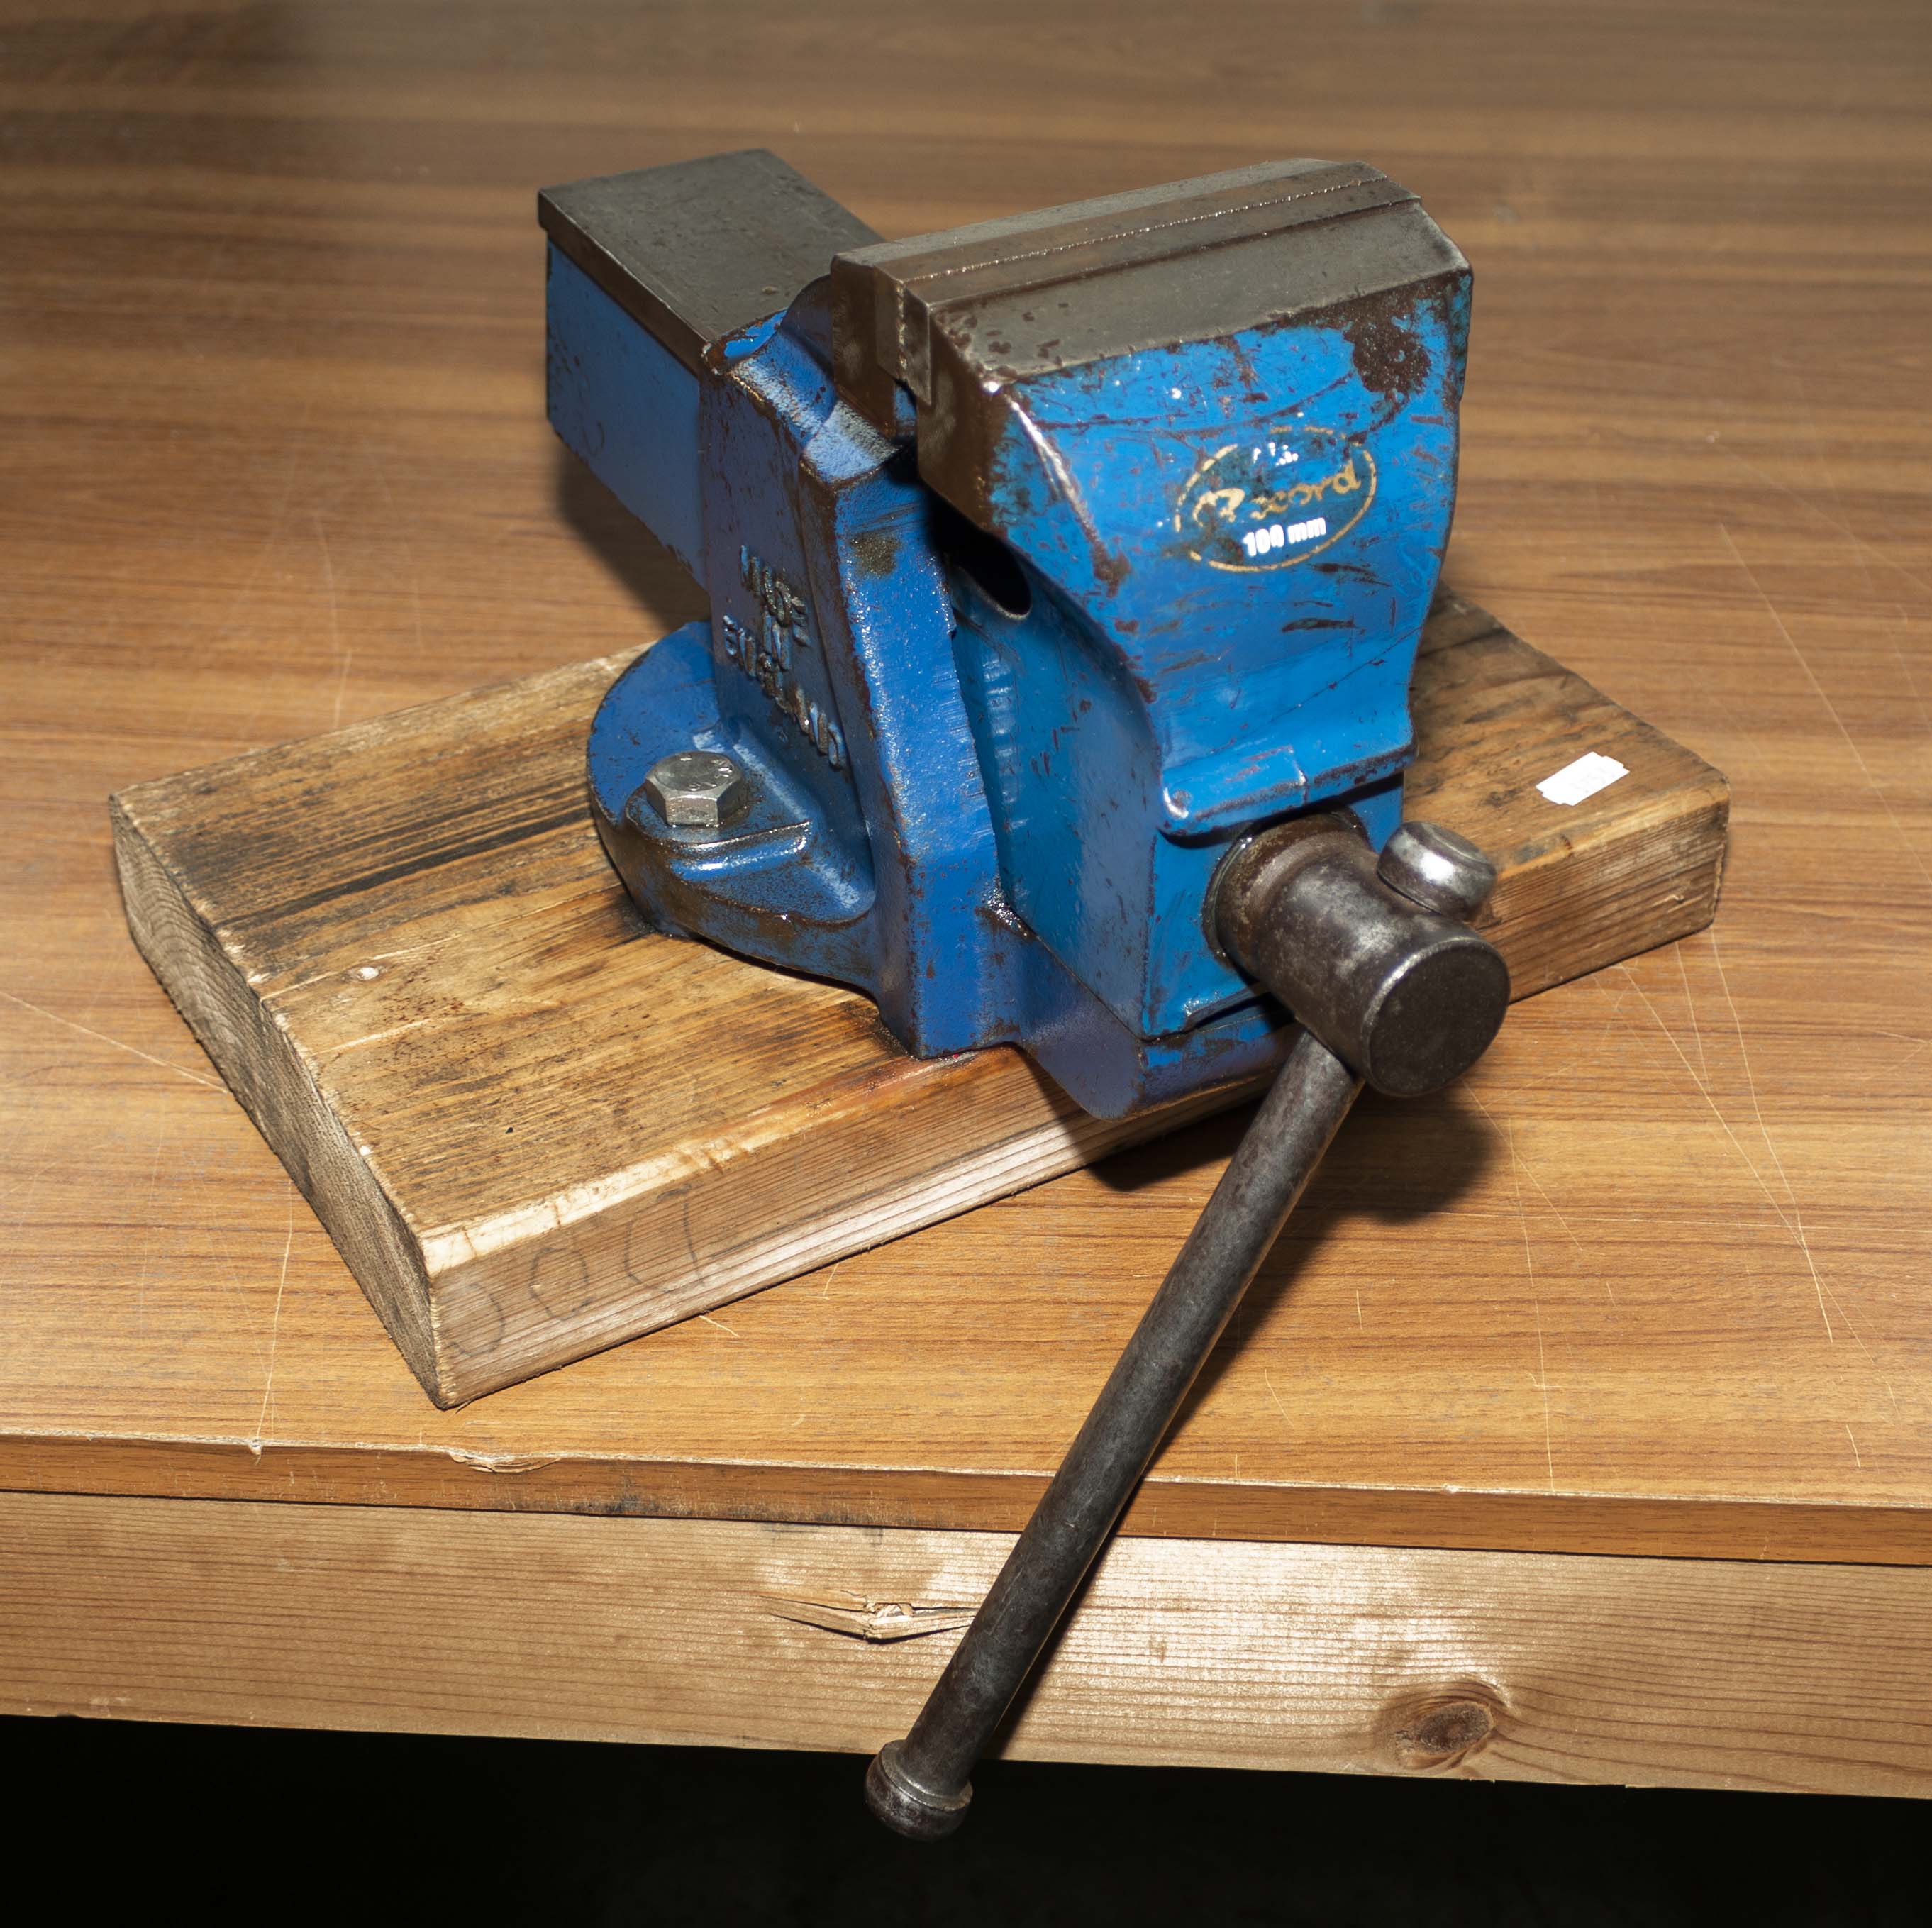 A small bench vice